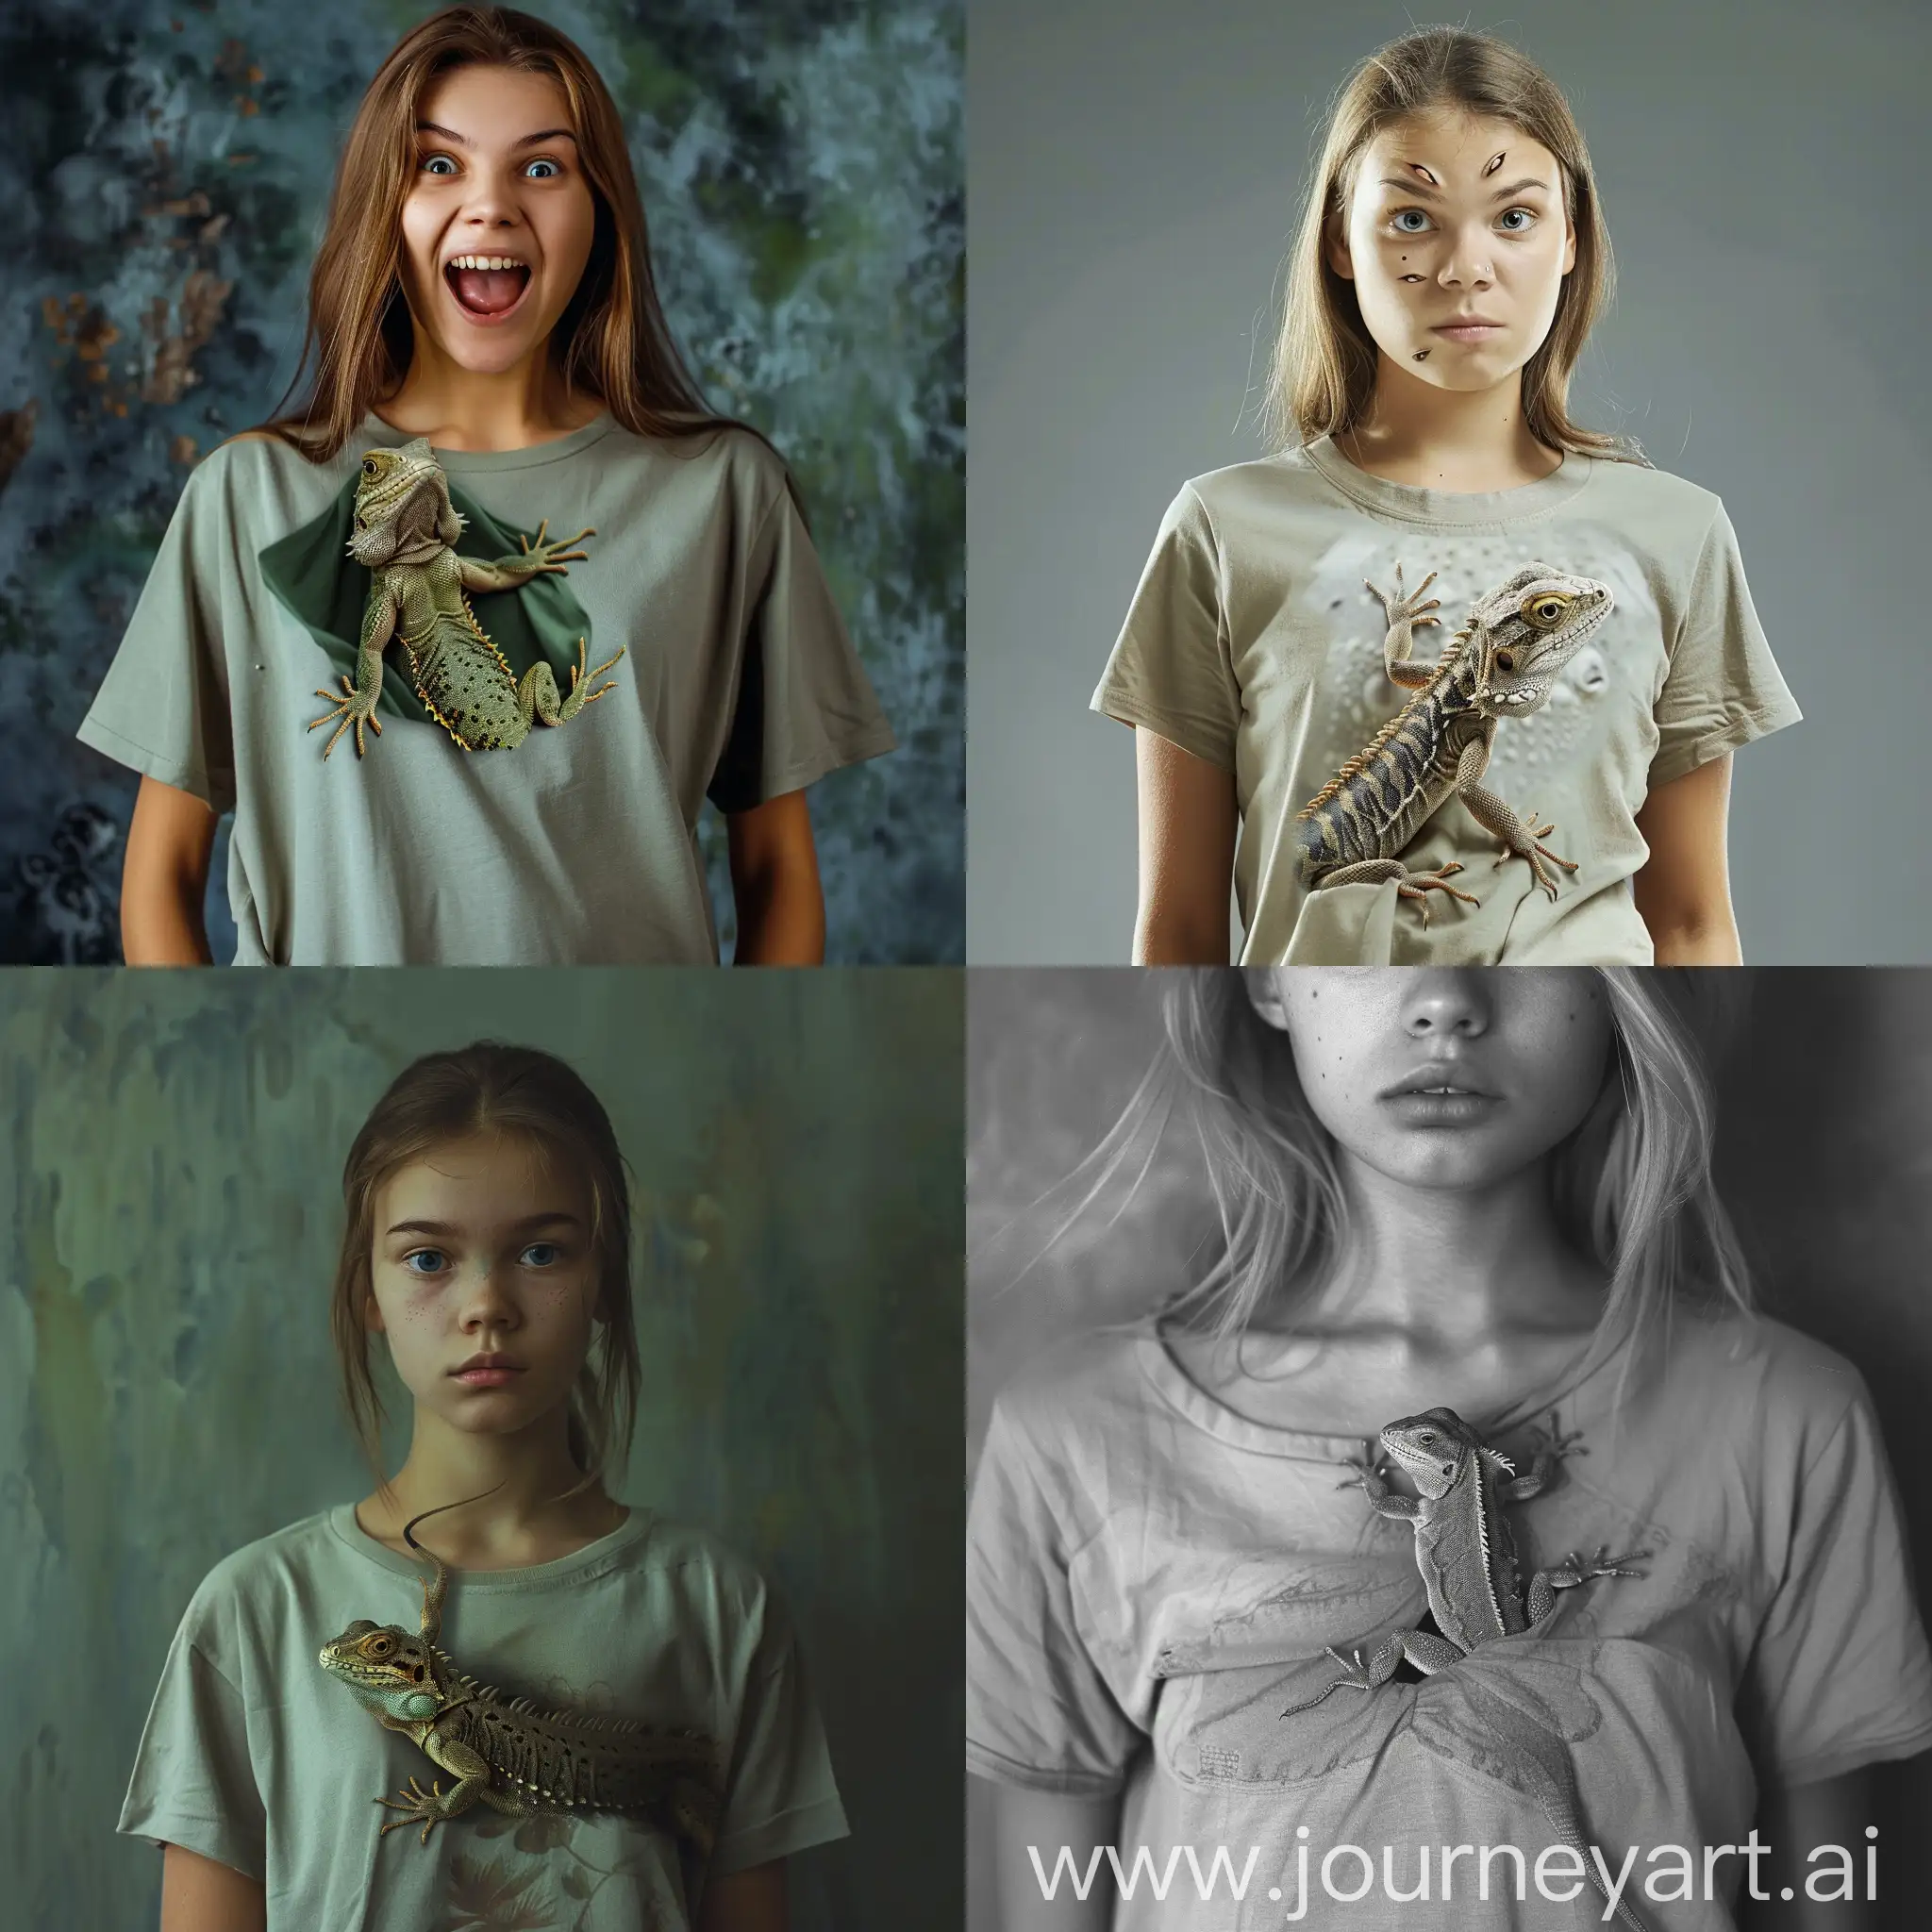  beautiful attractive girl wearing casual t-shirt and one lizard going through inside her t-shirt , girl scary face, realistic 